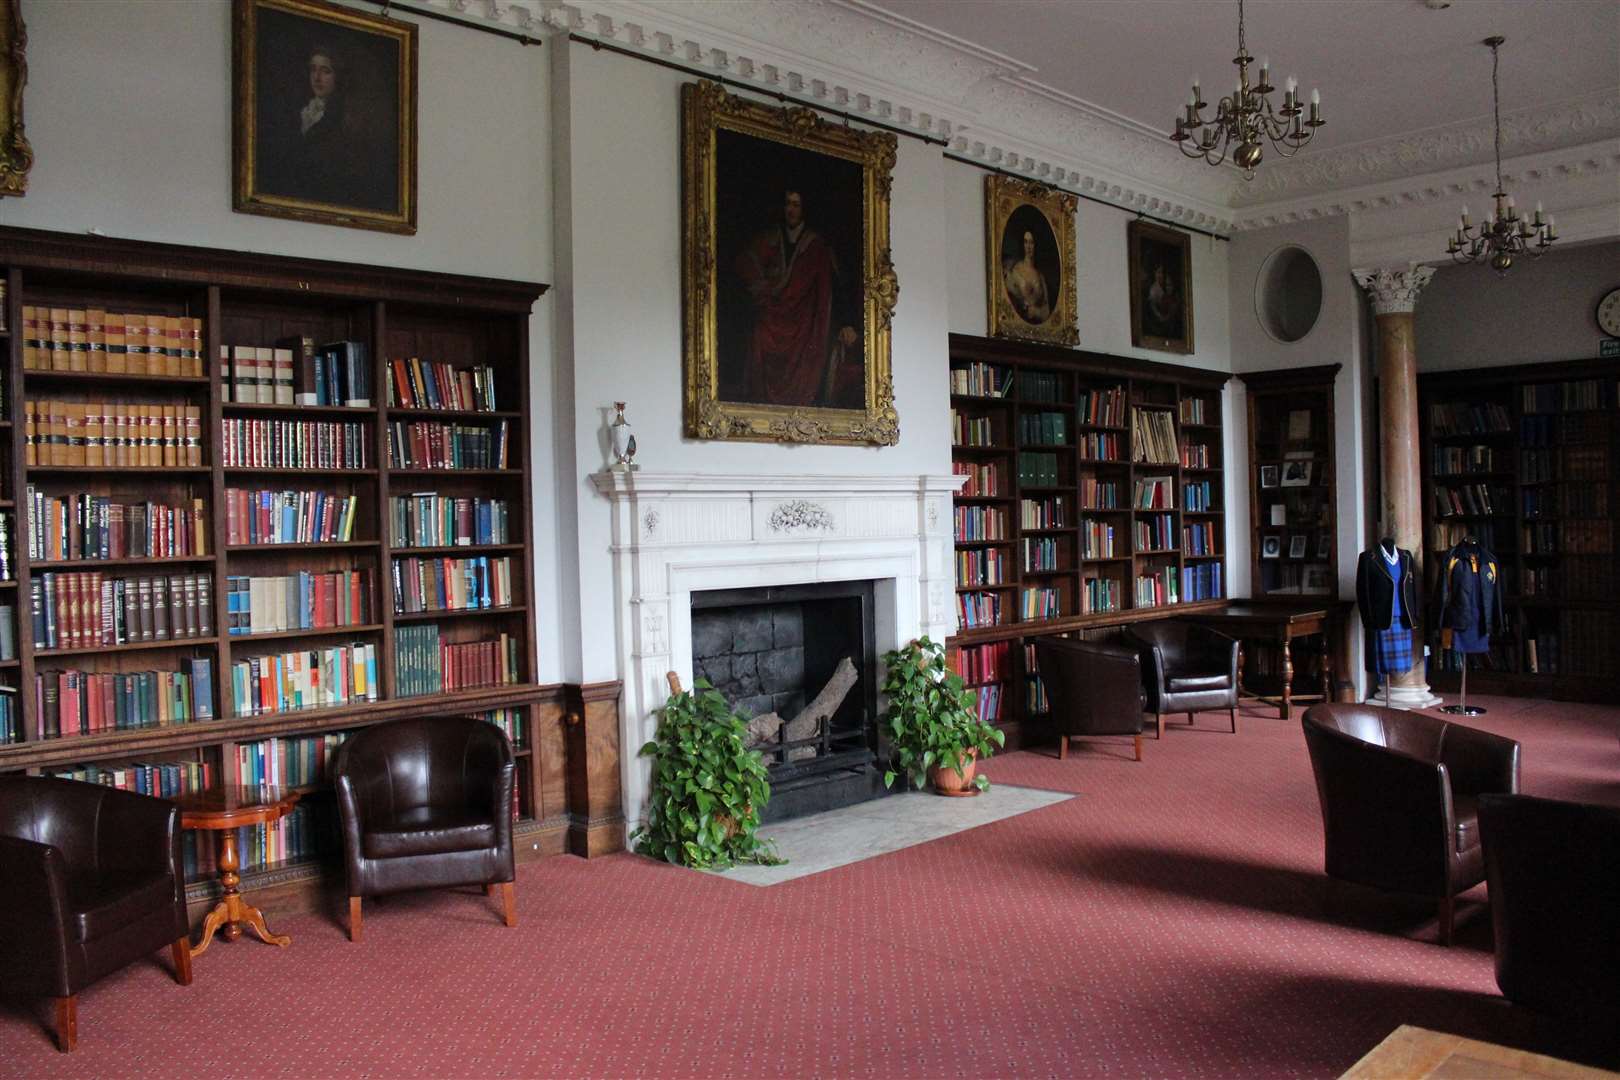 The old library at Cobham Hall was used as the headmistress' office in Wild Child. Picture: Cobham Hall